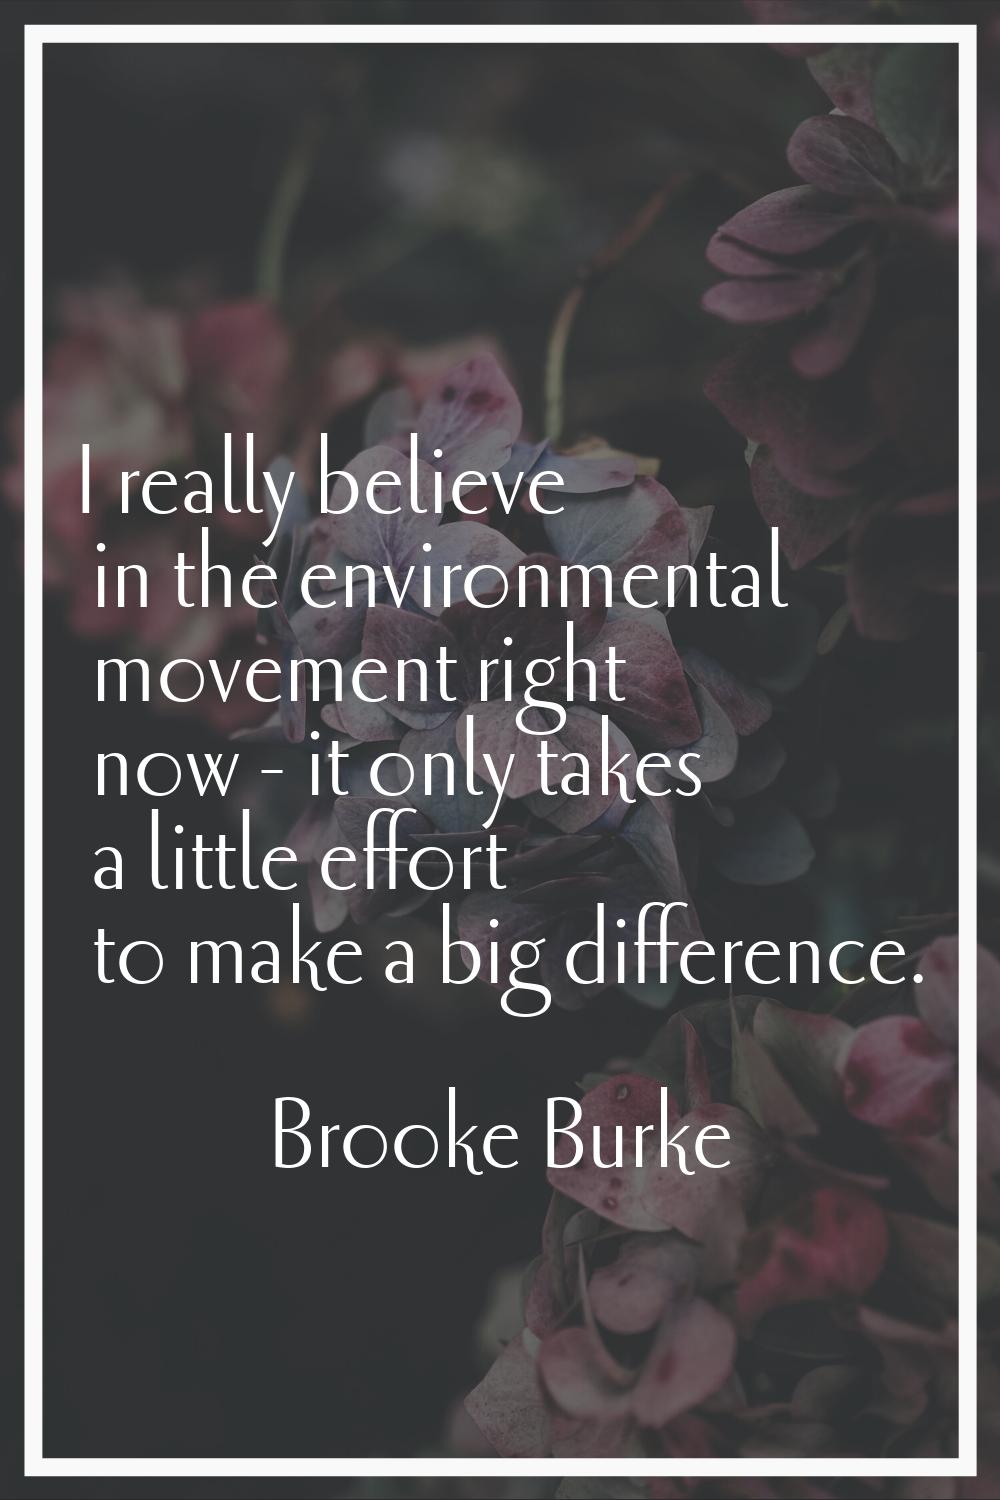 I really believe in the environmental movement right now - it only takes a little effort to make a 